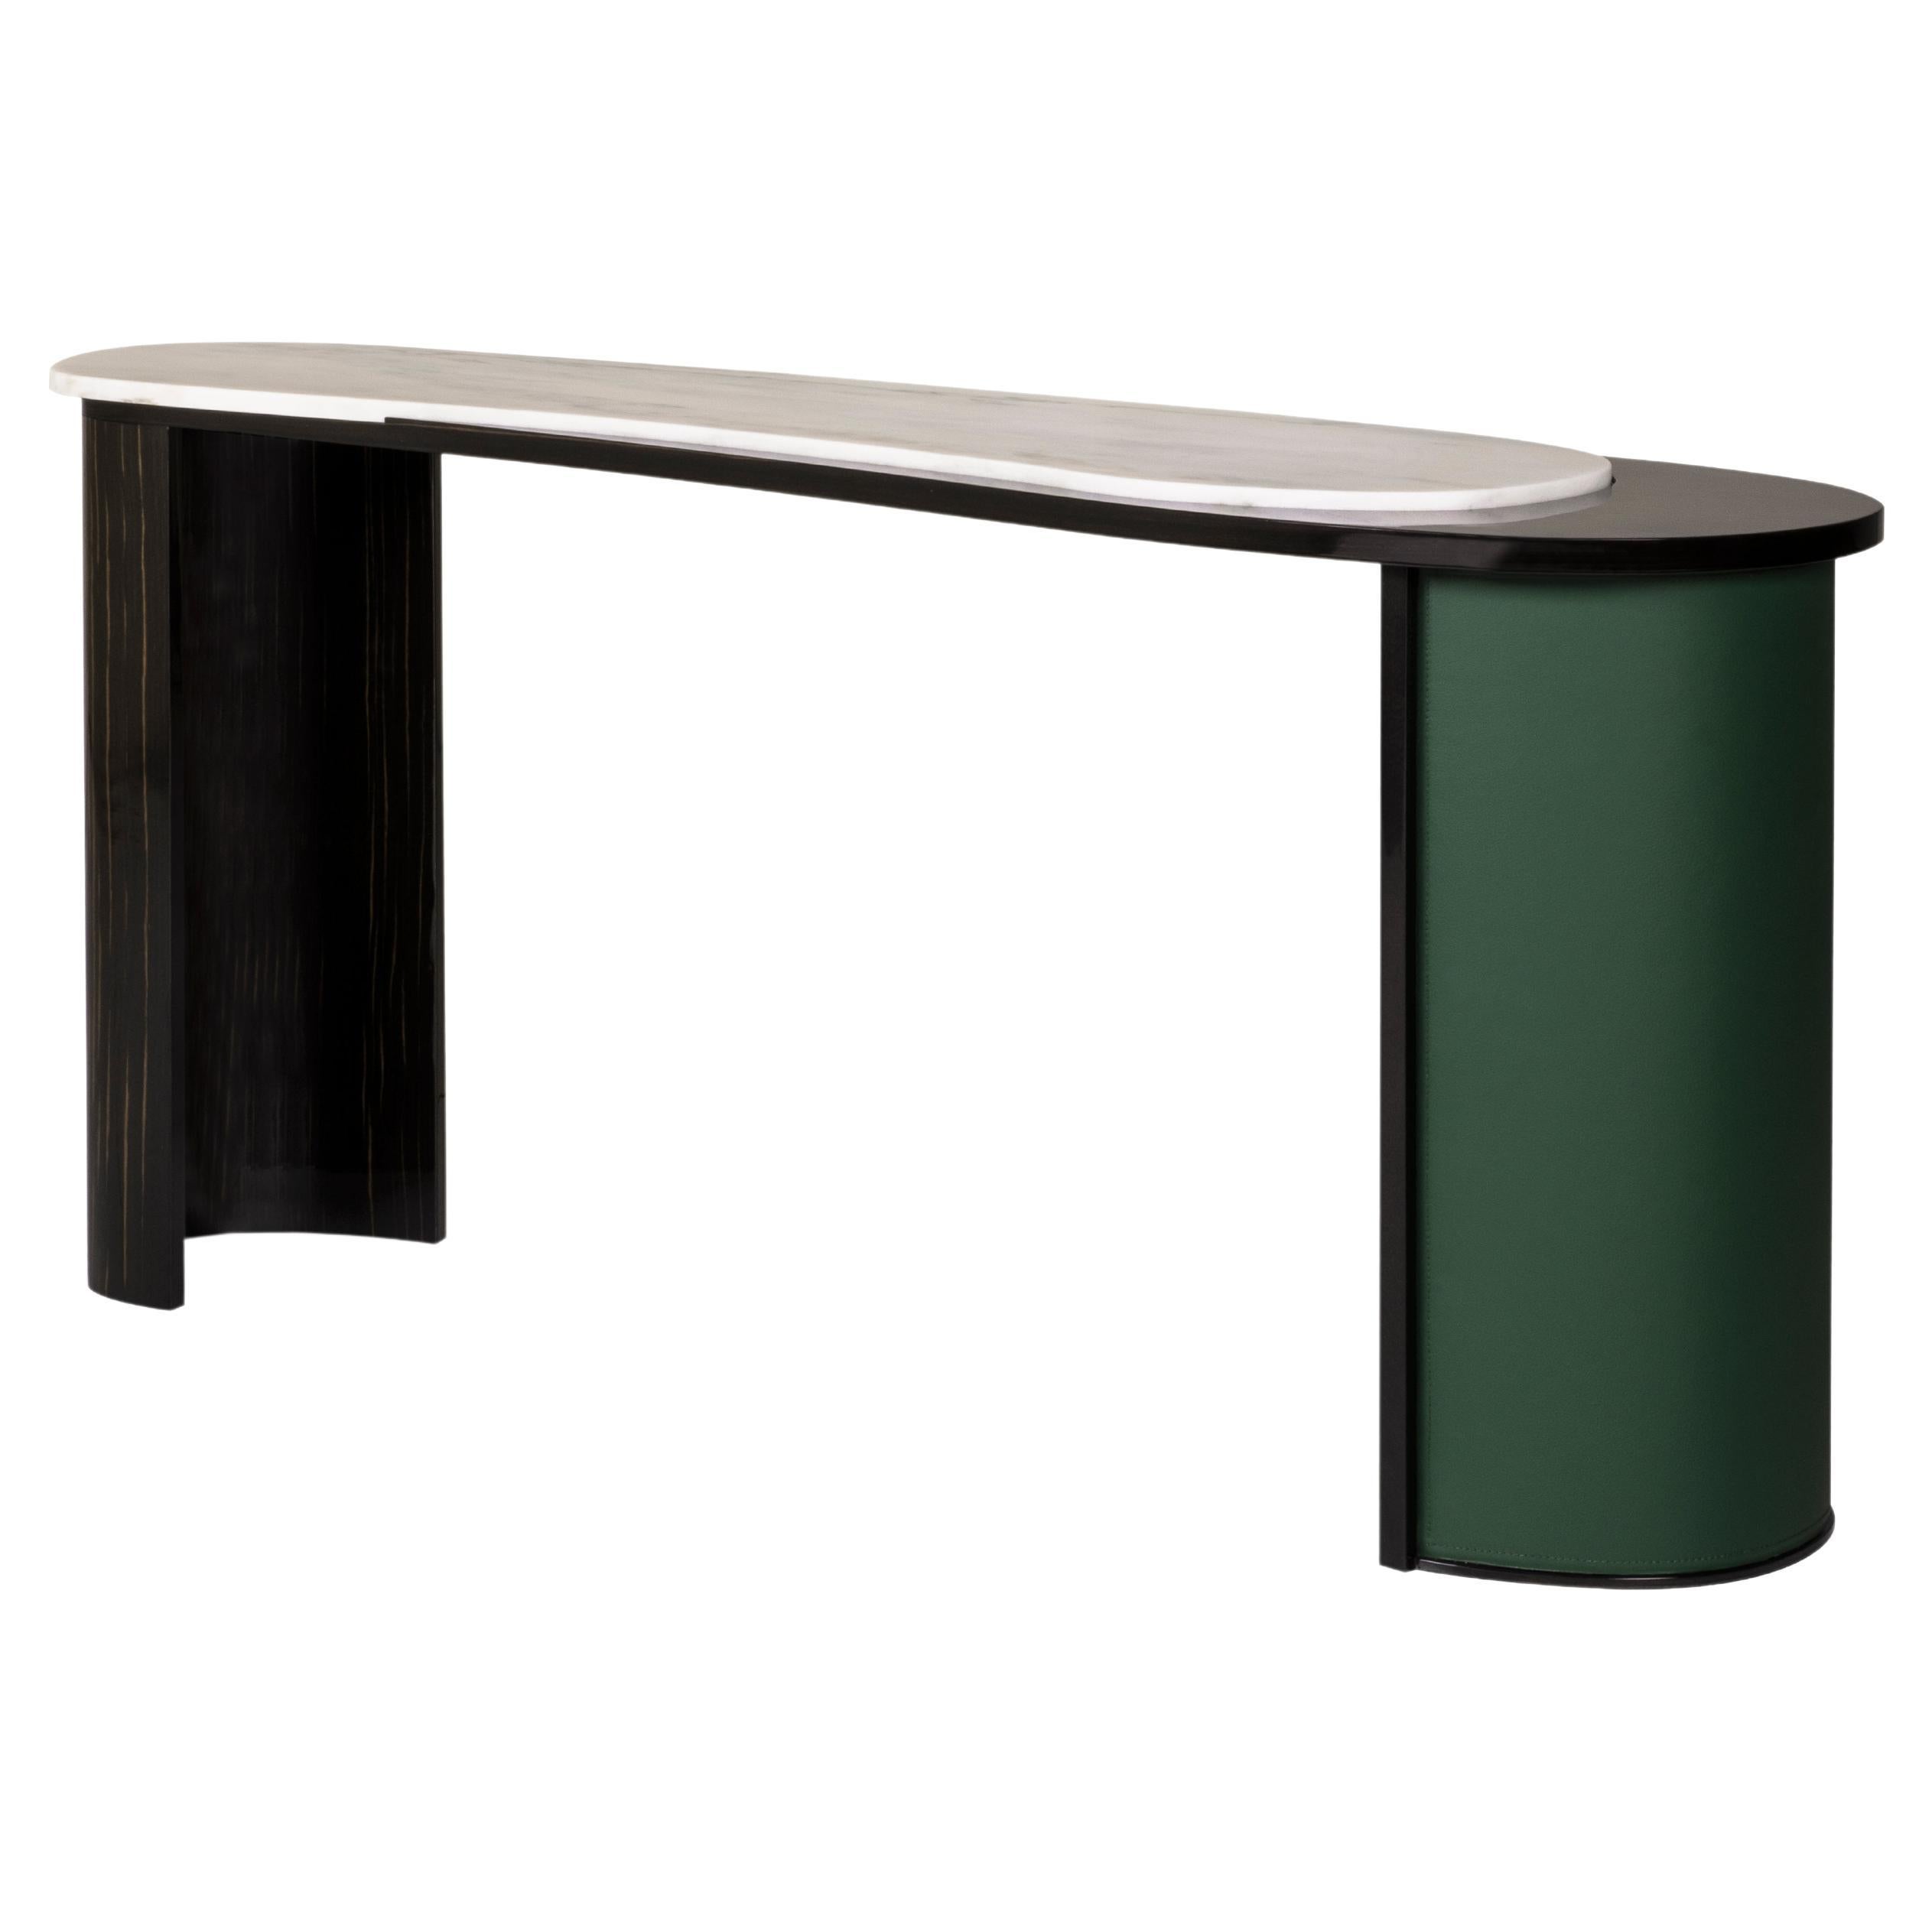 21st Century Art Deco Style Castelo Console Handcrafted Portugal by Greenapple